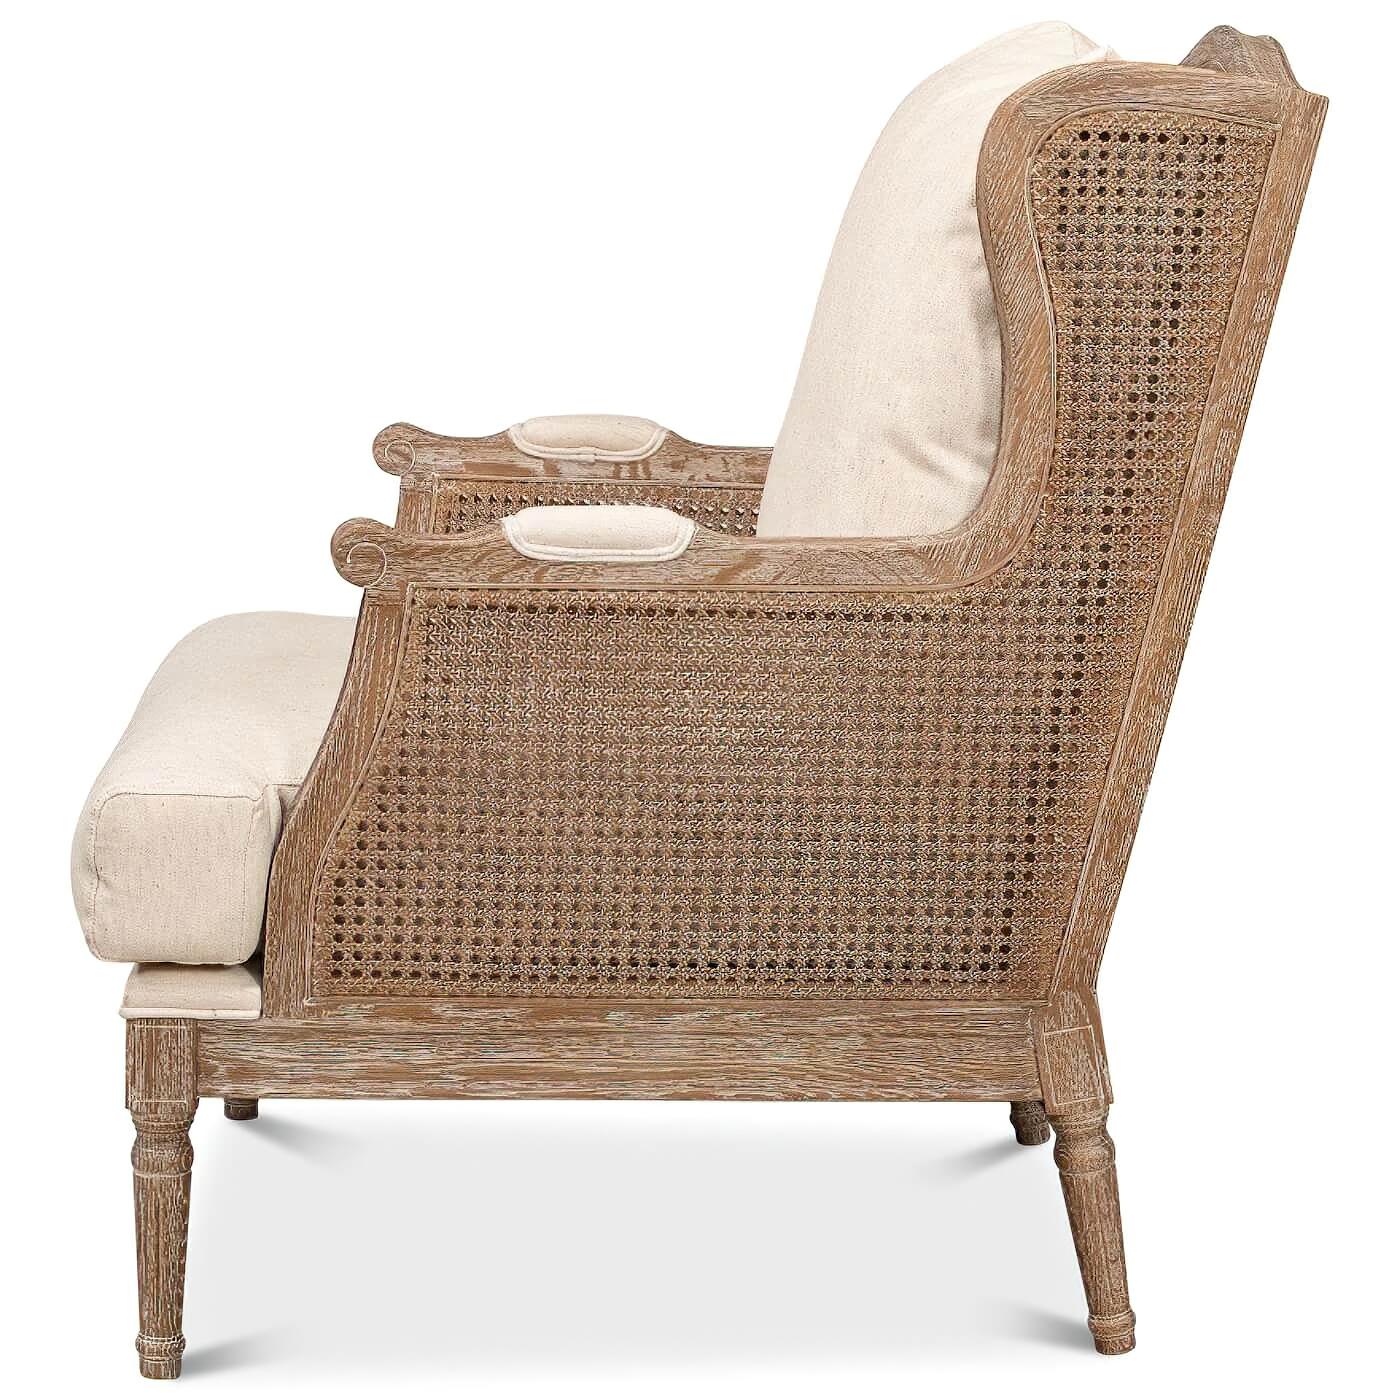 A French Louis XVI style whitewashed wingback armchair with cane back and sides. This beautiful chair has an ivory linen upholstered seat and back cushion. It is crafted from whitewashed oak and given a beige transitional finish. 

Dimensions: 29